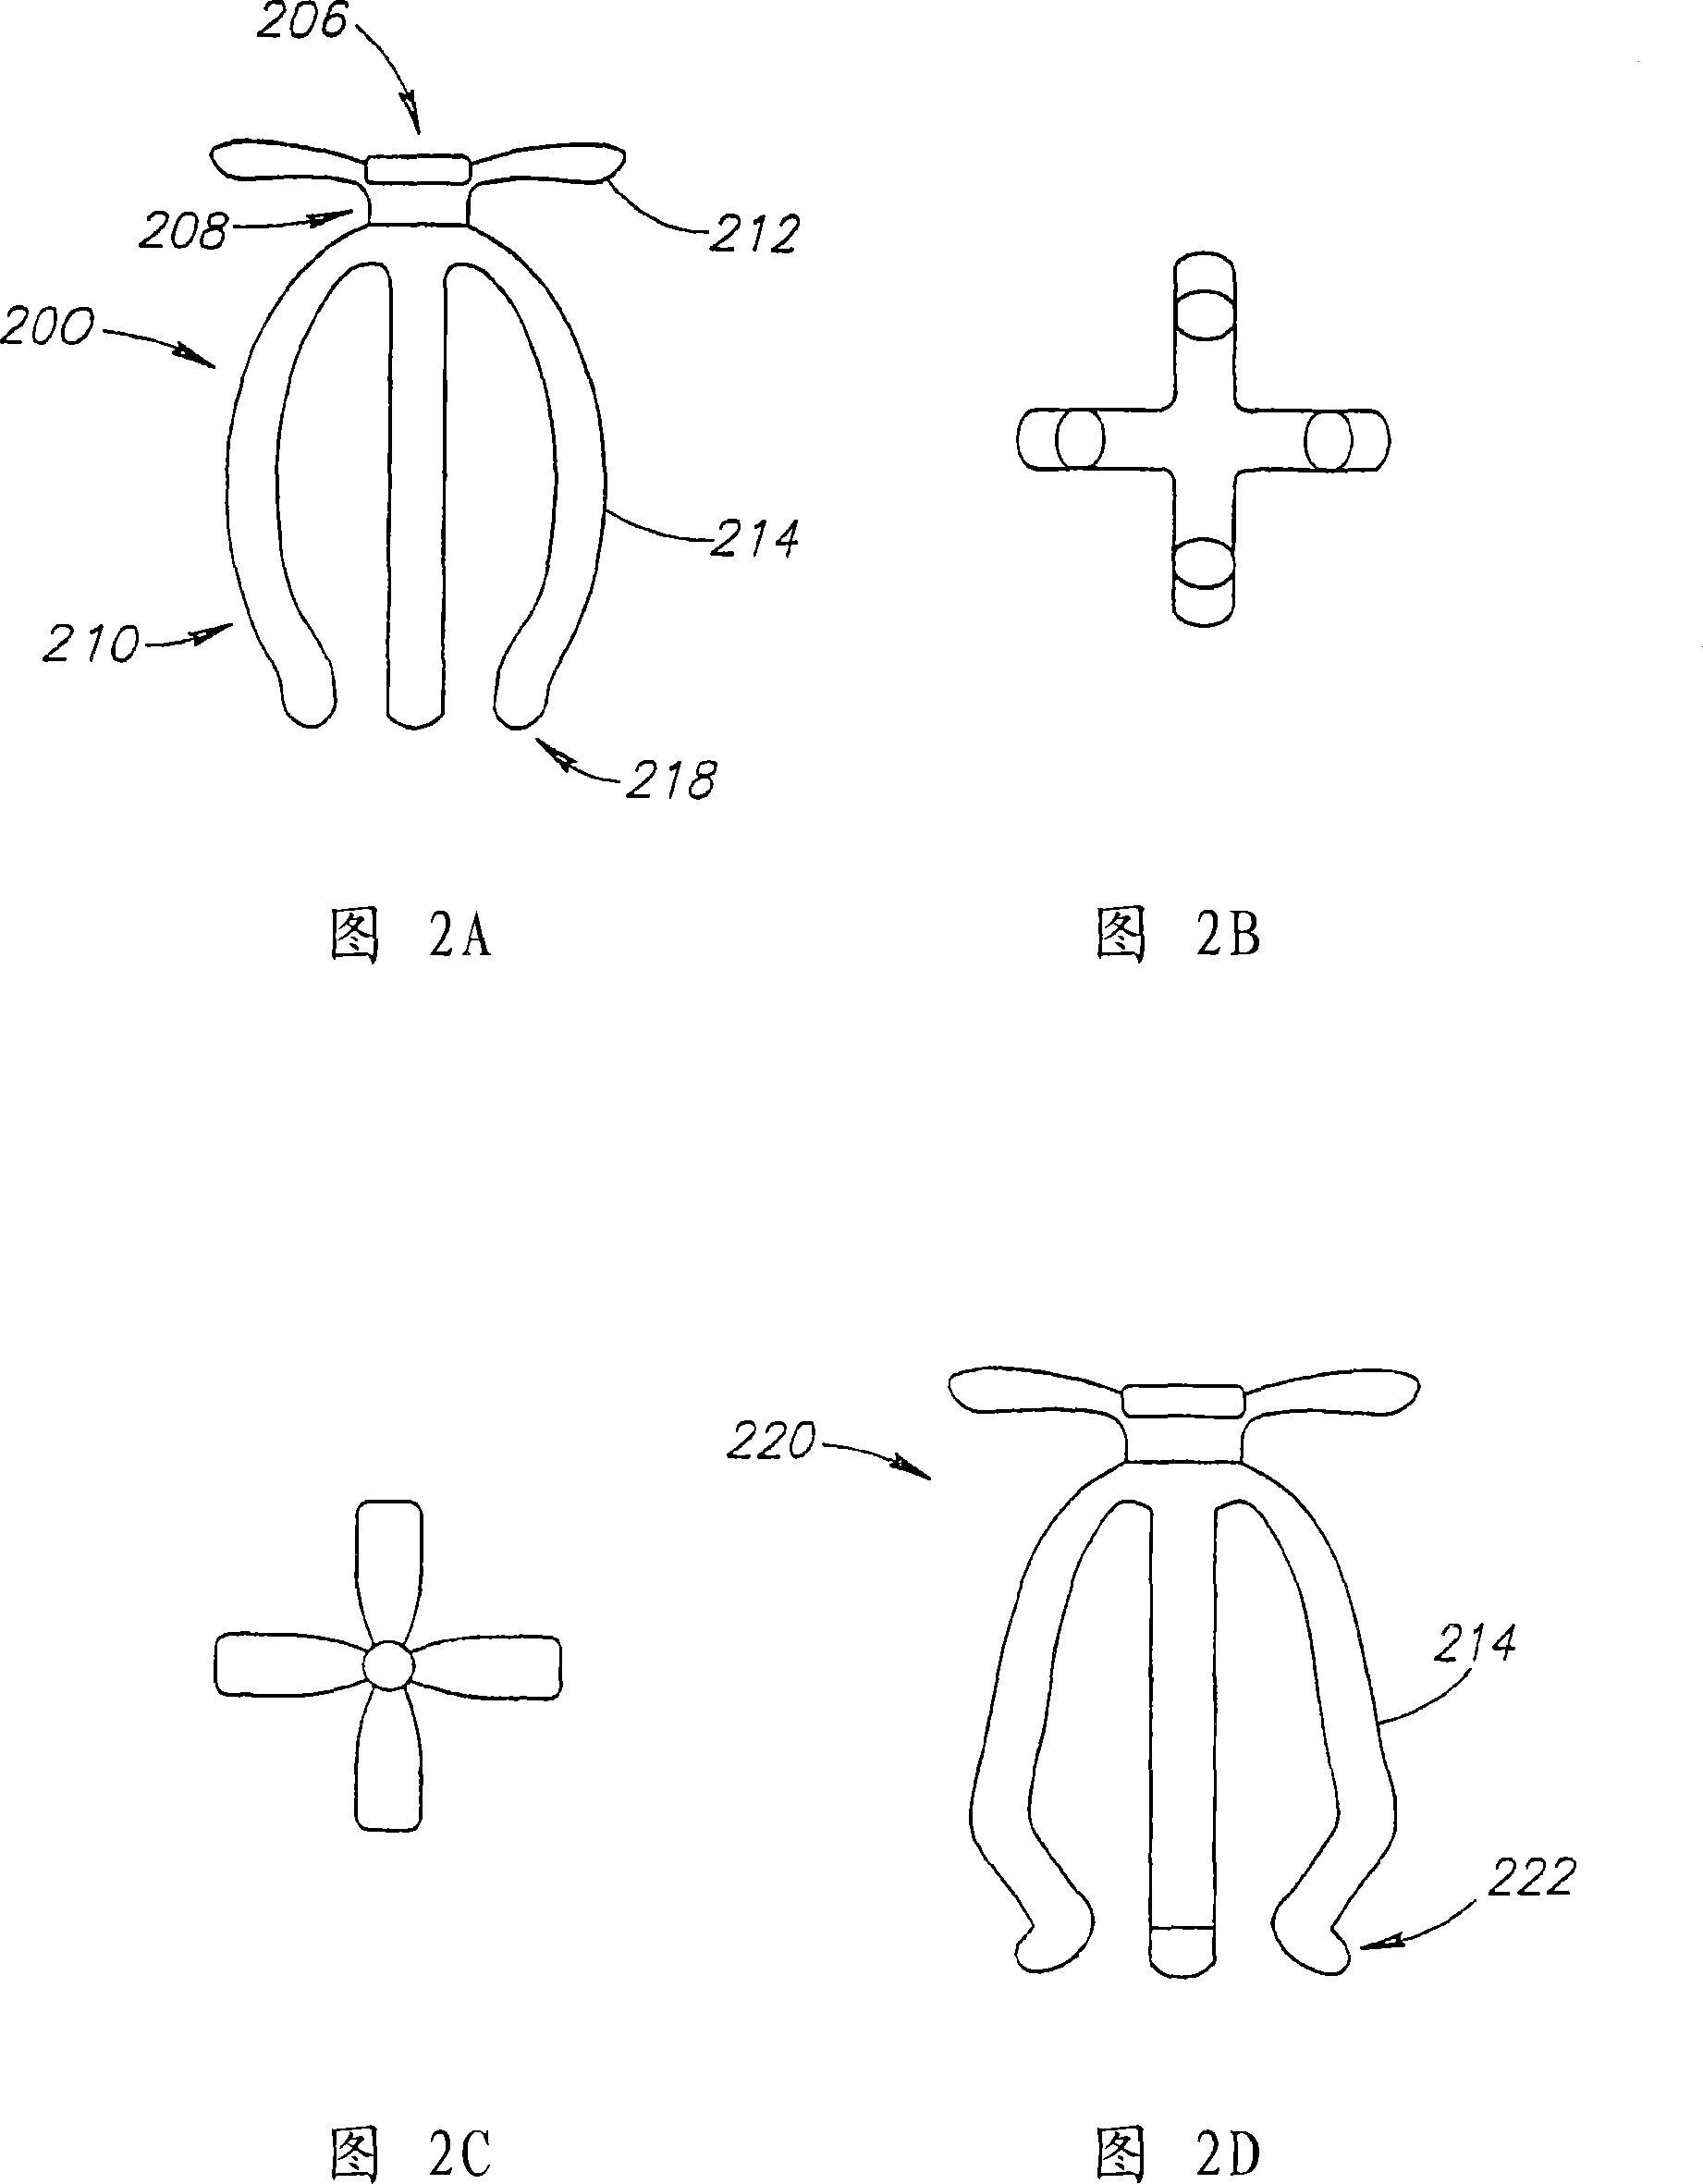 Apparatus for the prevention of urinary incontinence in females